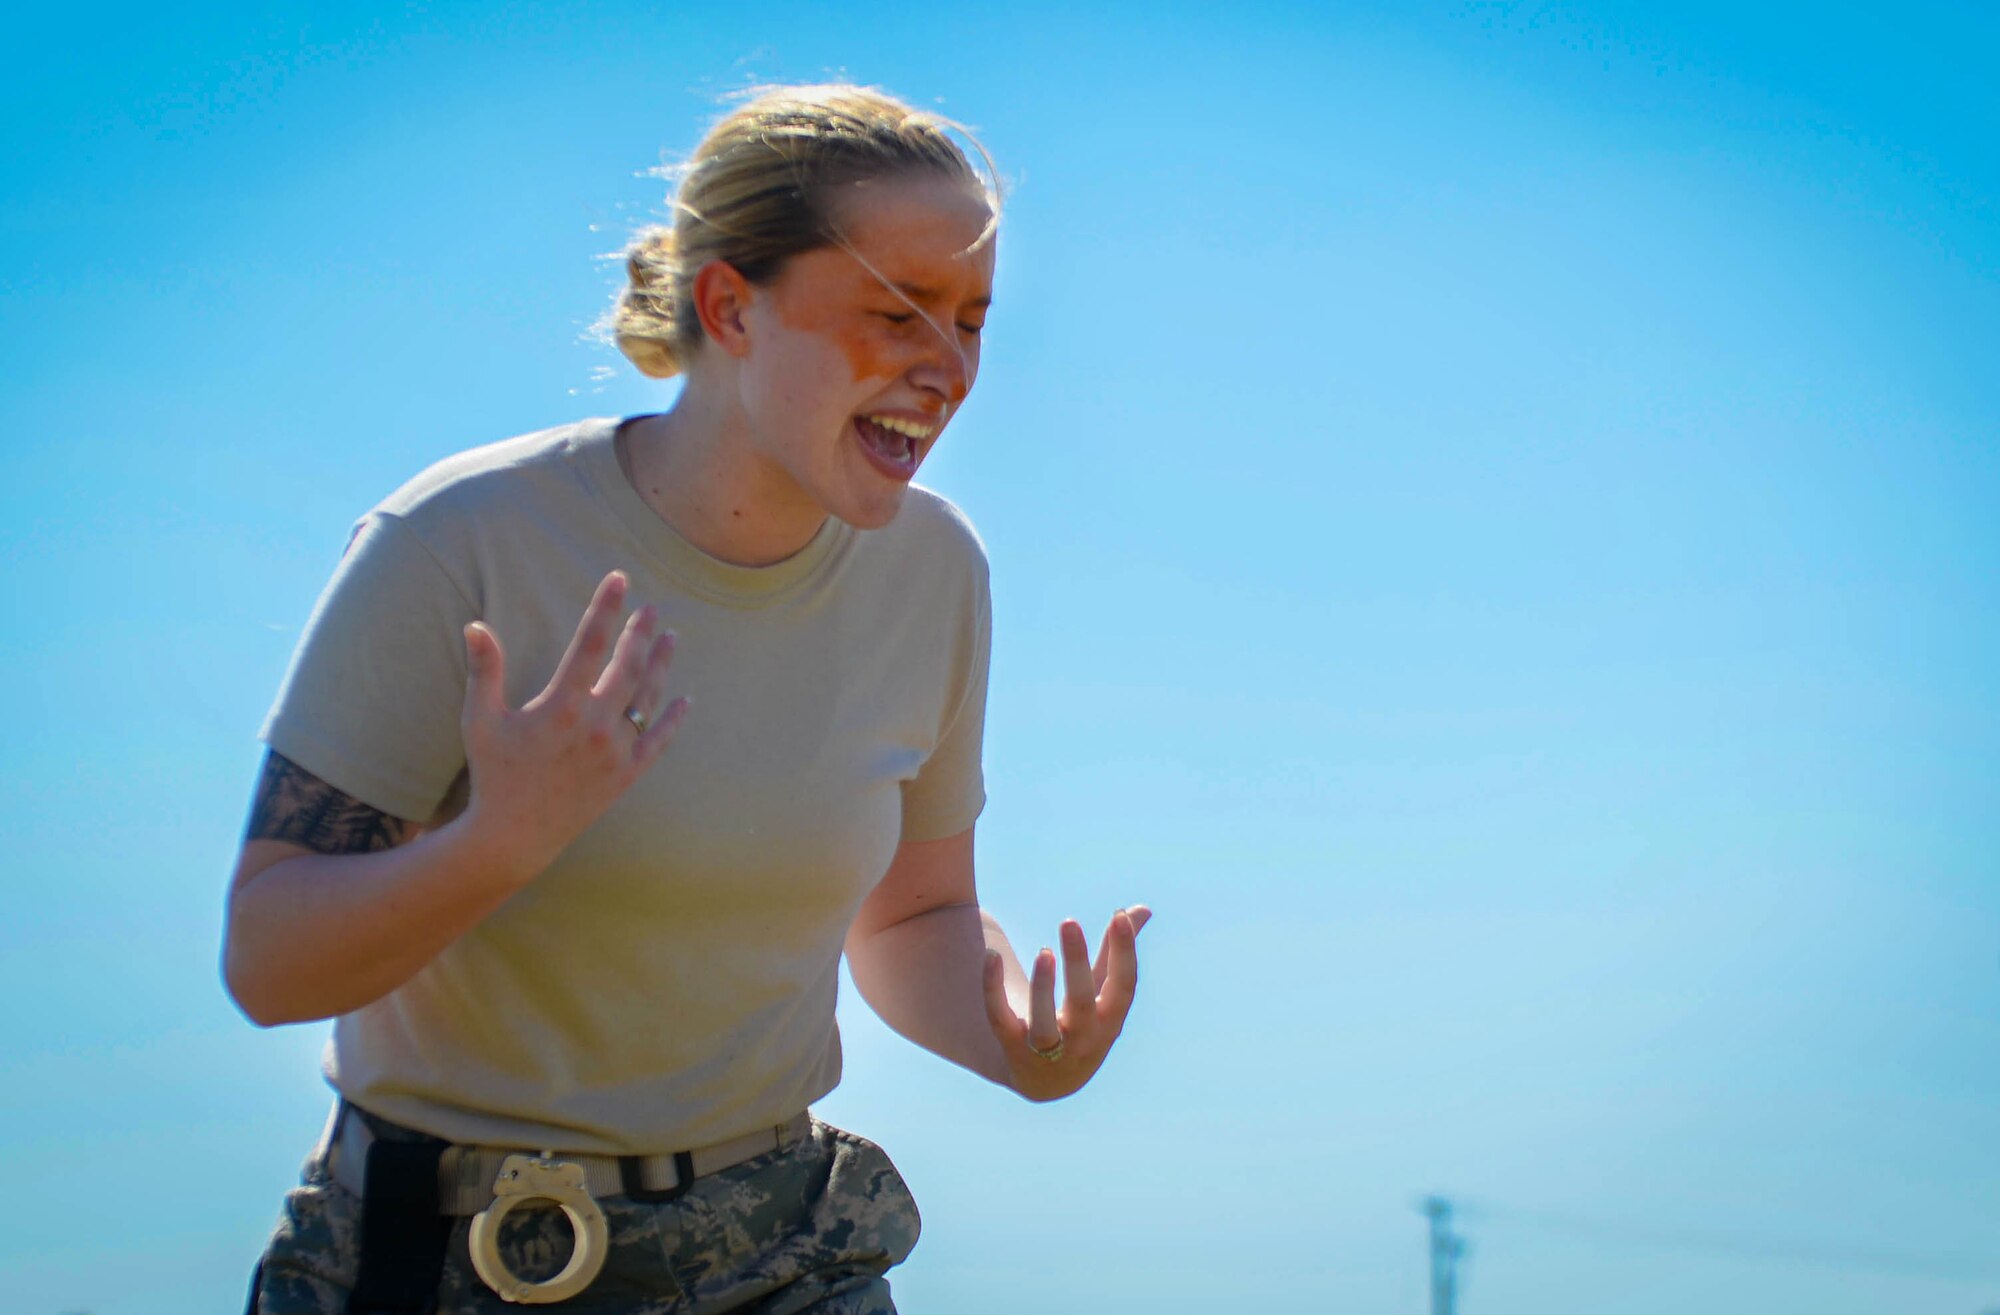 U.S. Air Force Airman 1st Class Hannah McCoy, 20th Security Forces Squadron journeyman, reacts to pepper spray during training at Shaw Air Force Base, S.C., Feb. 29, 2016. McCoy had to count to ten before opening her eyes and running to four stations to engage simulated perpetrators. (U.S. Air Force photo by Senior Airman Jensen Stidham)